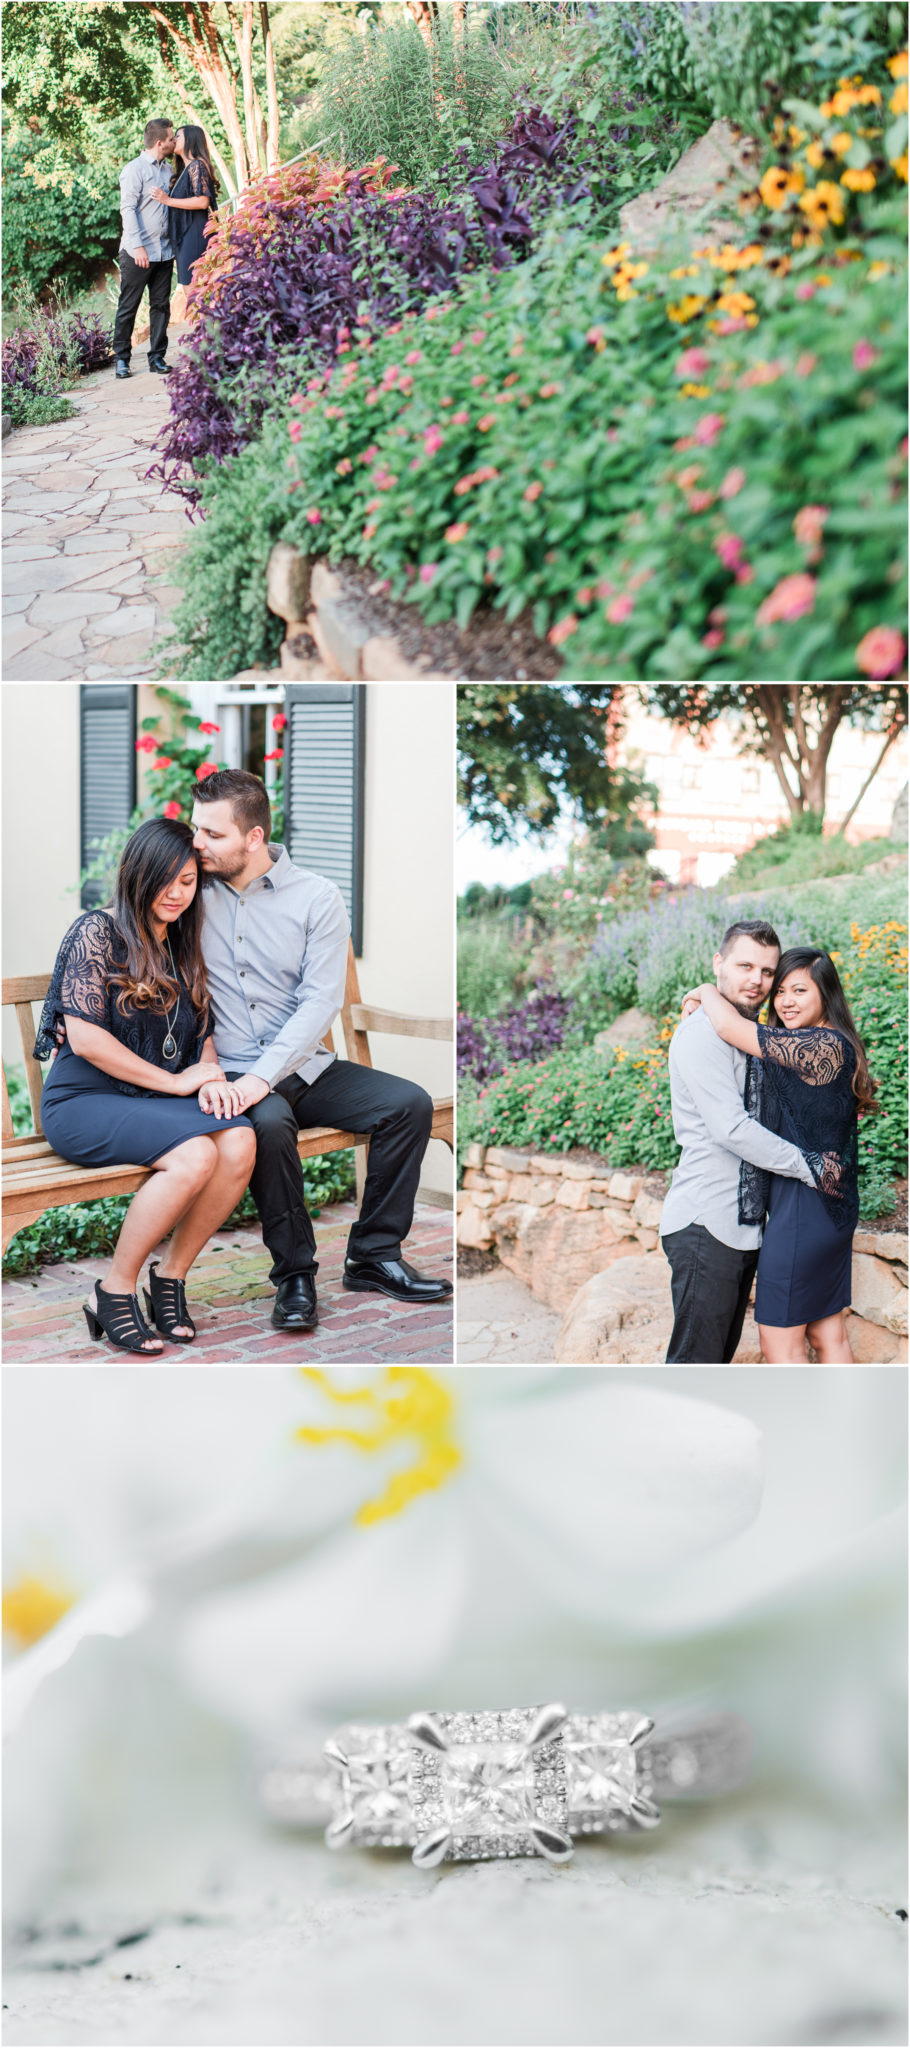 Summer sunrise engagement in downtown Greenville